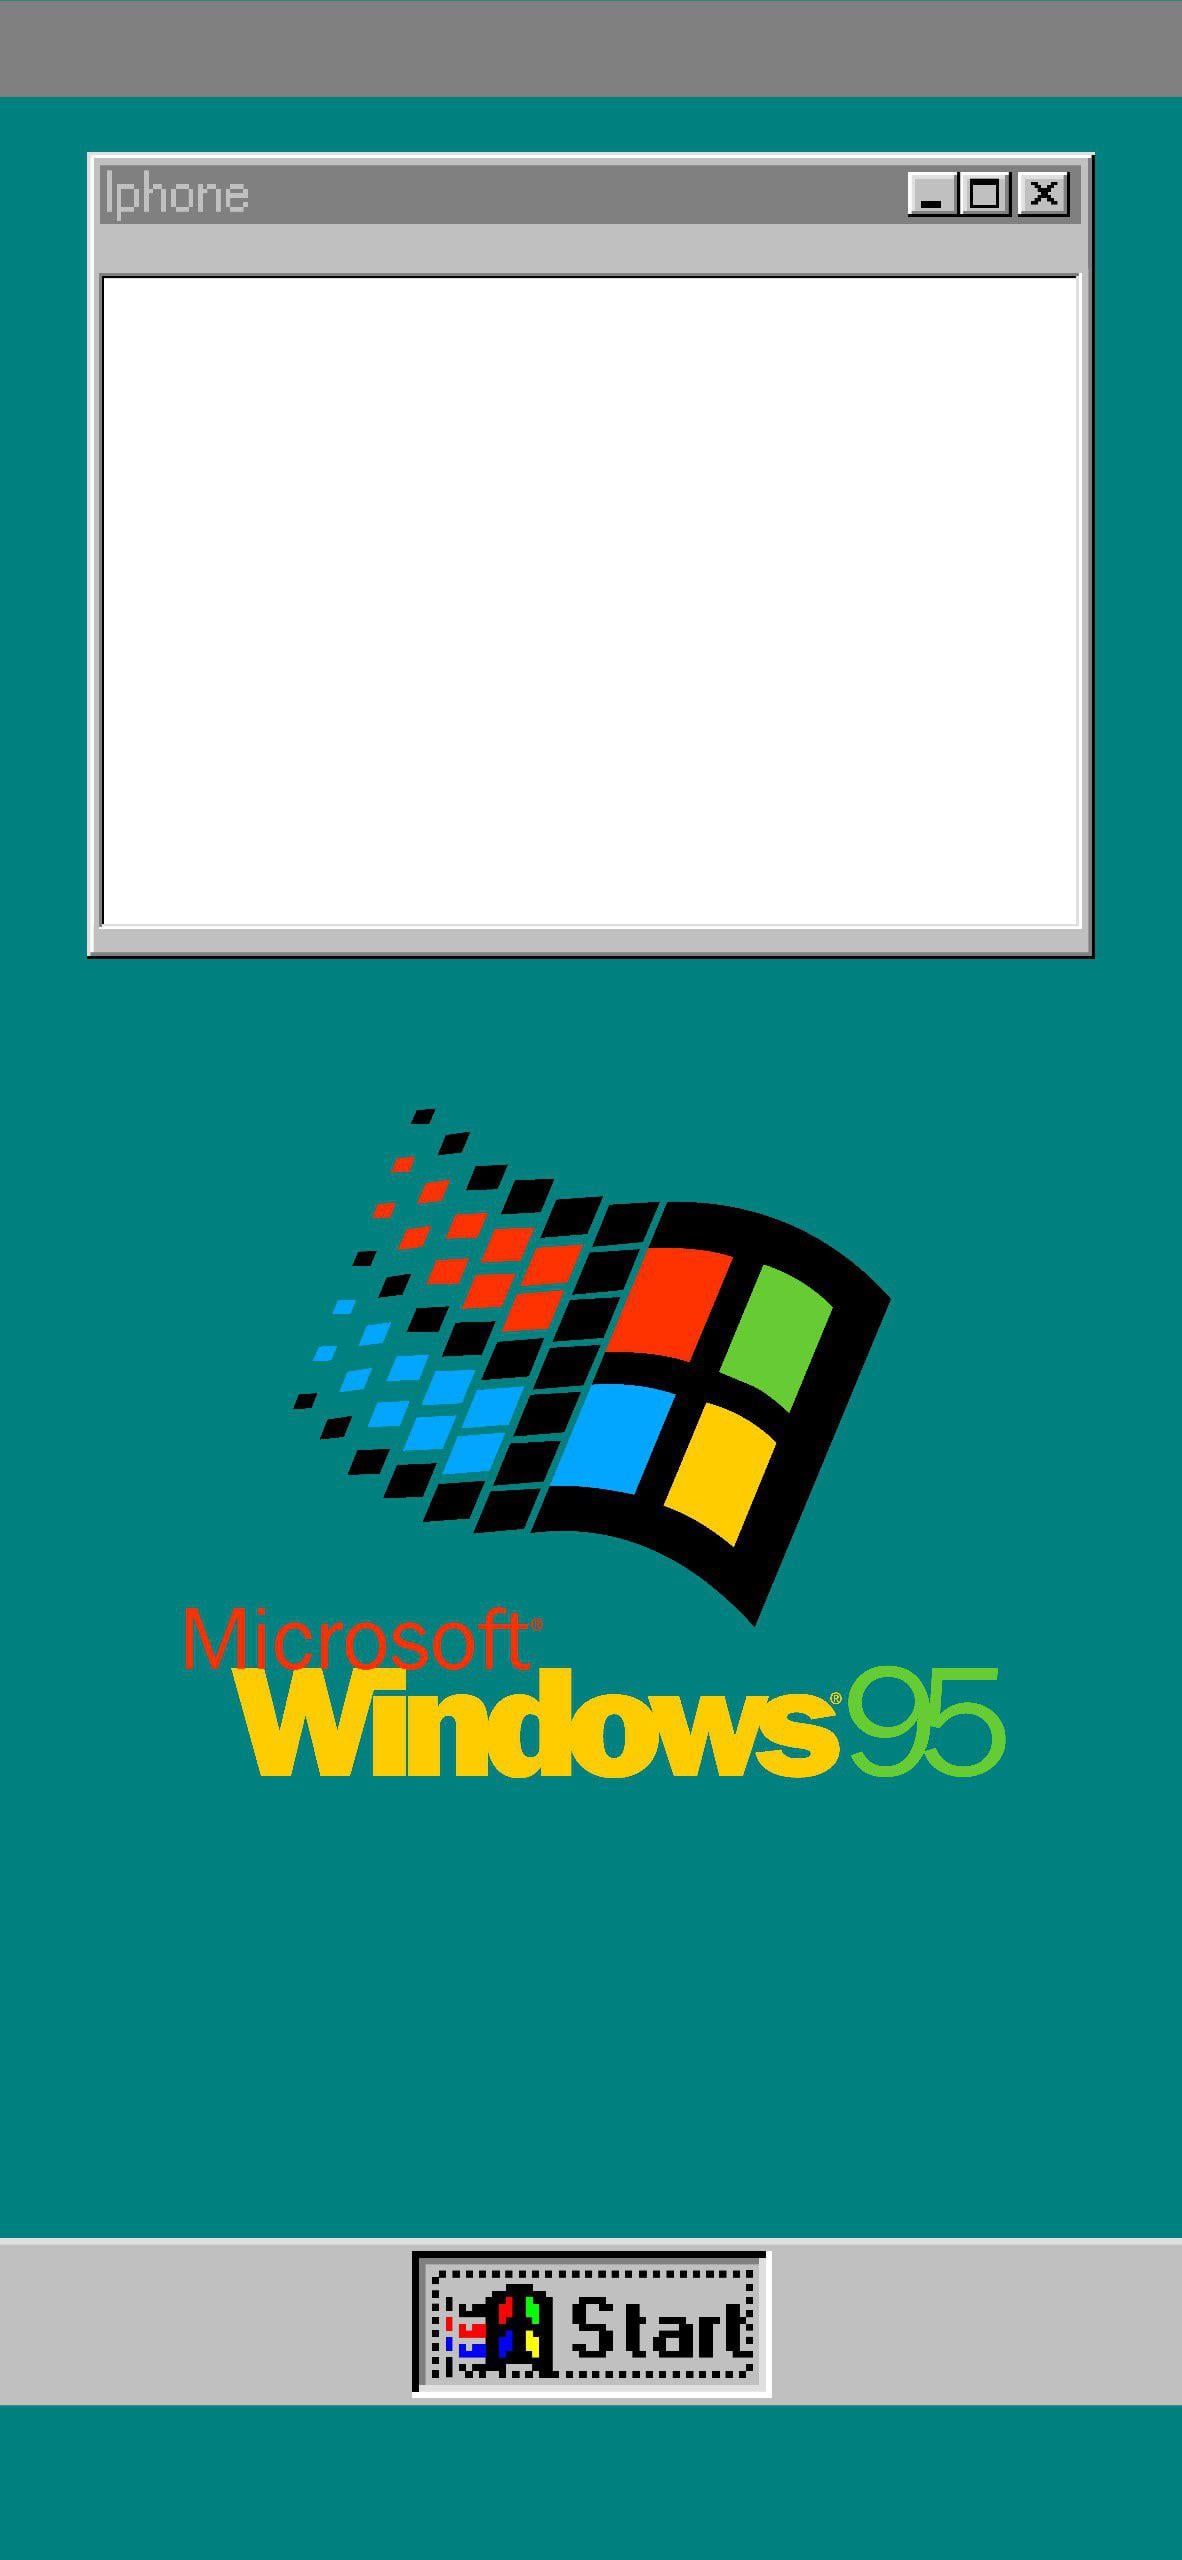 A computer screen with the windows 95 logo on it - Windows 95